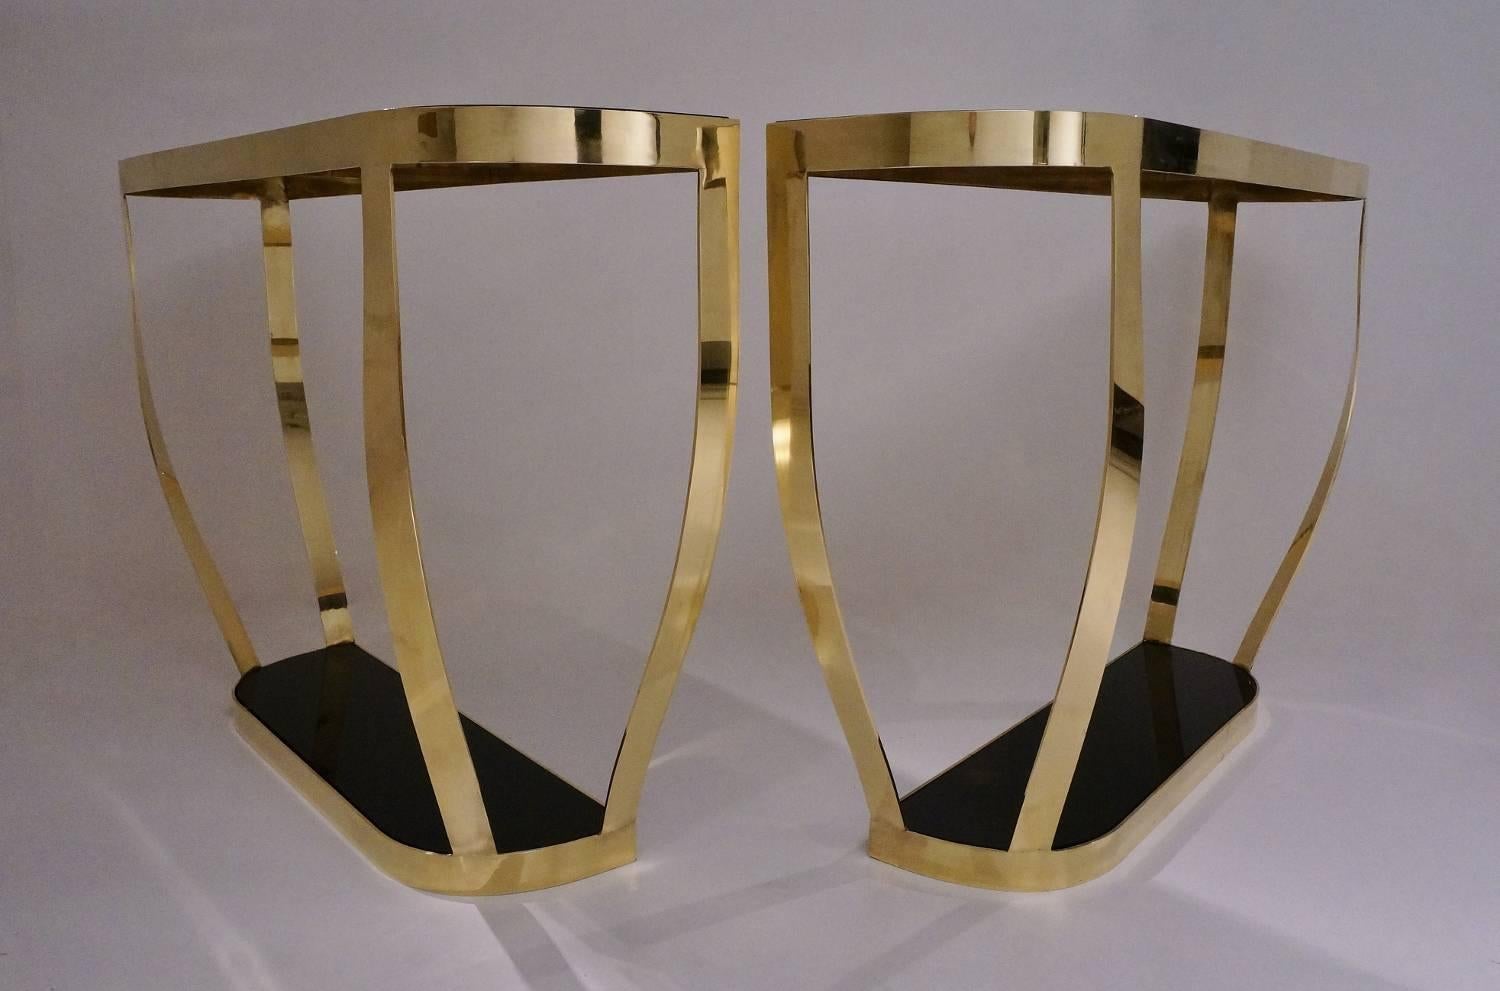 Art Deco Pair of Console Tables, Solid Brass with Black Glass and Shelf, Italian